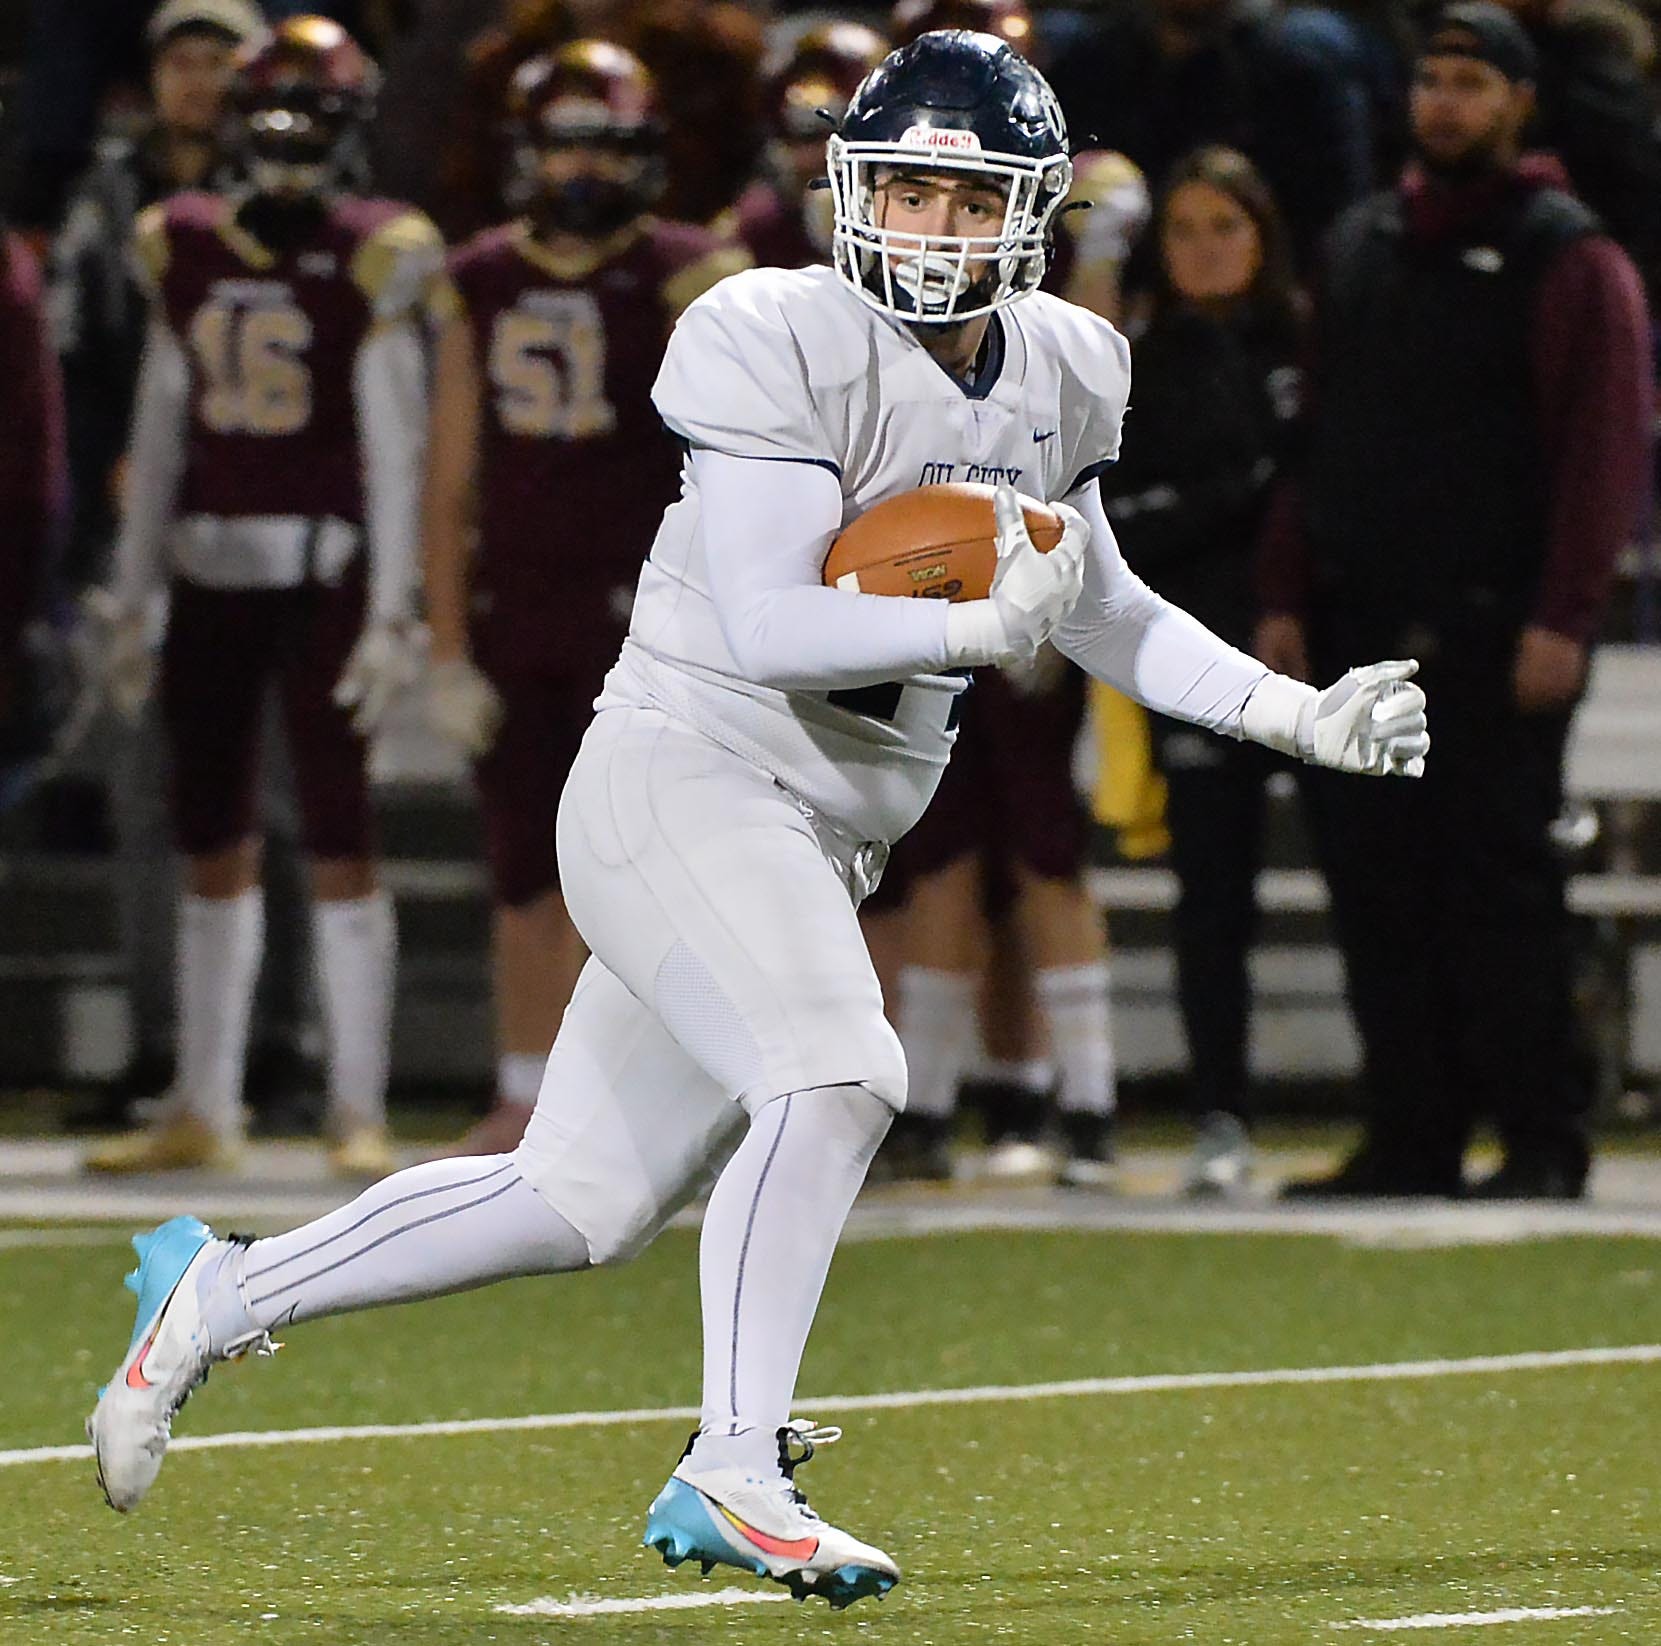 Ready for the next round? District 10, PIAA football playoff games are